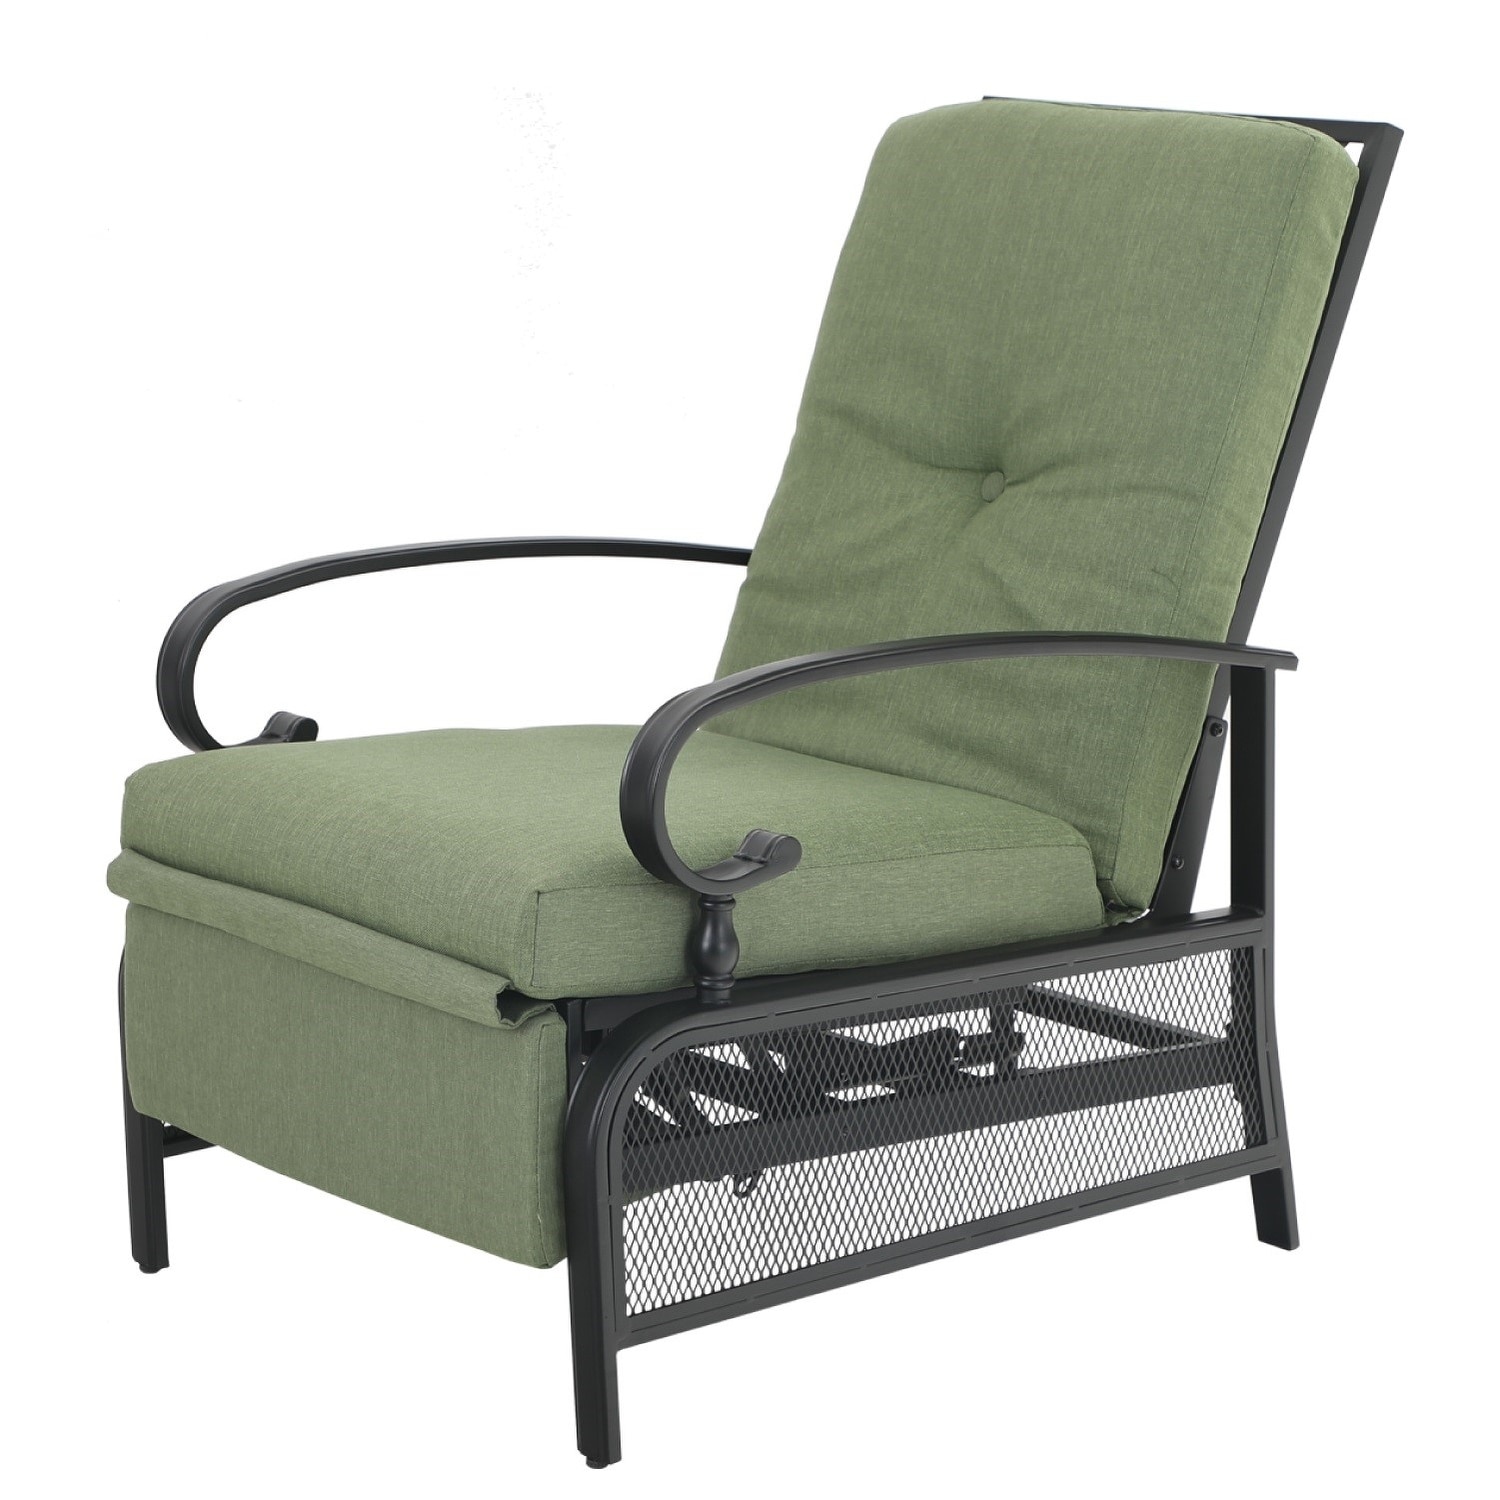 Outdoor Metal Adjustable Cushioned Recliner Lounge Chair - N/A 